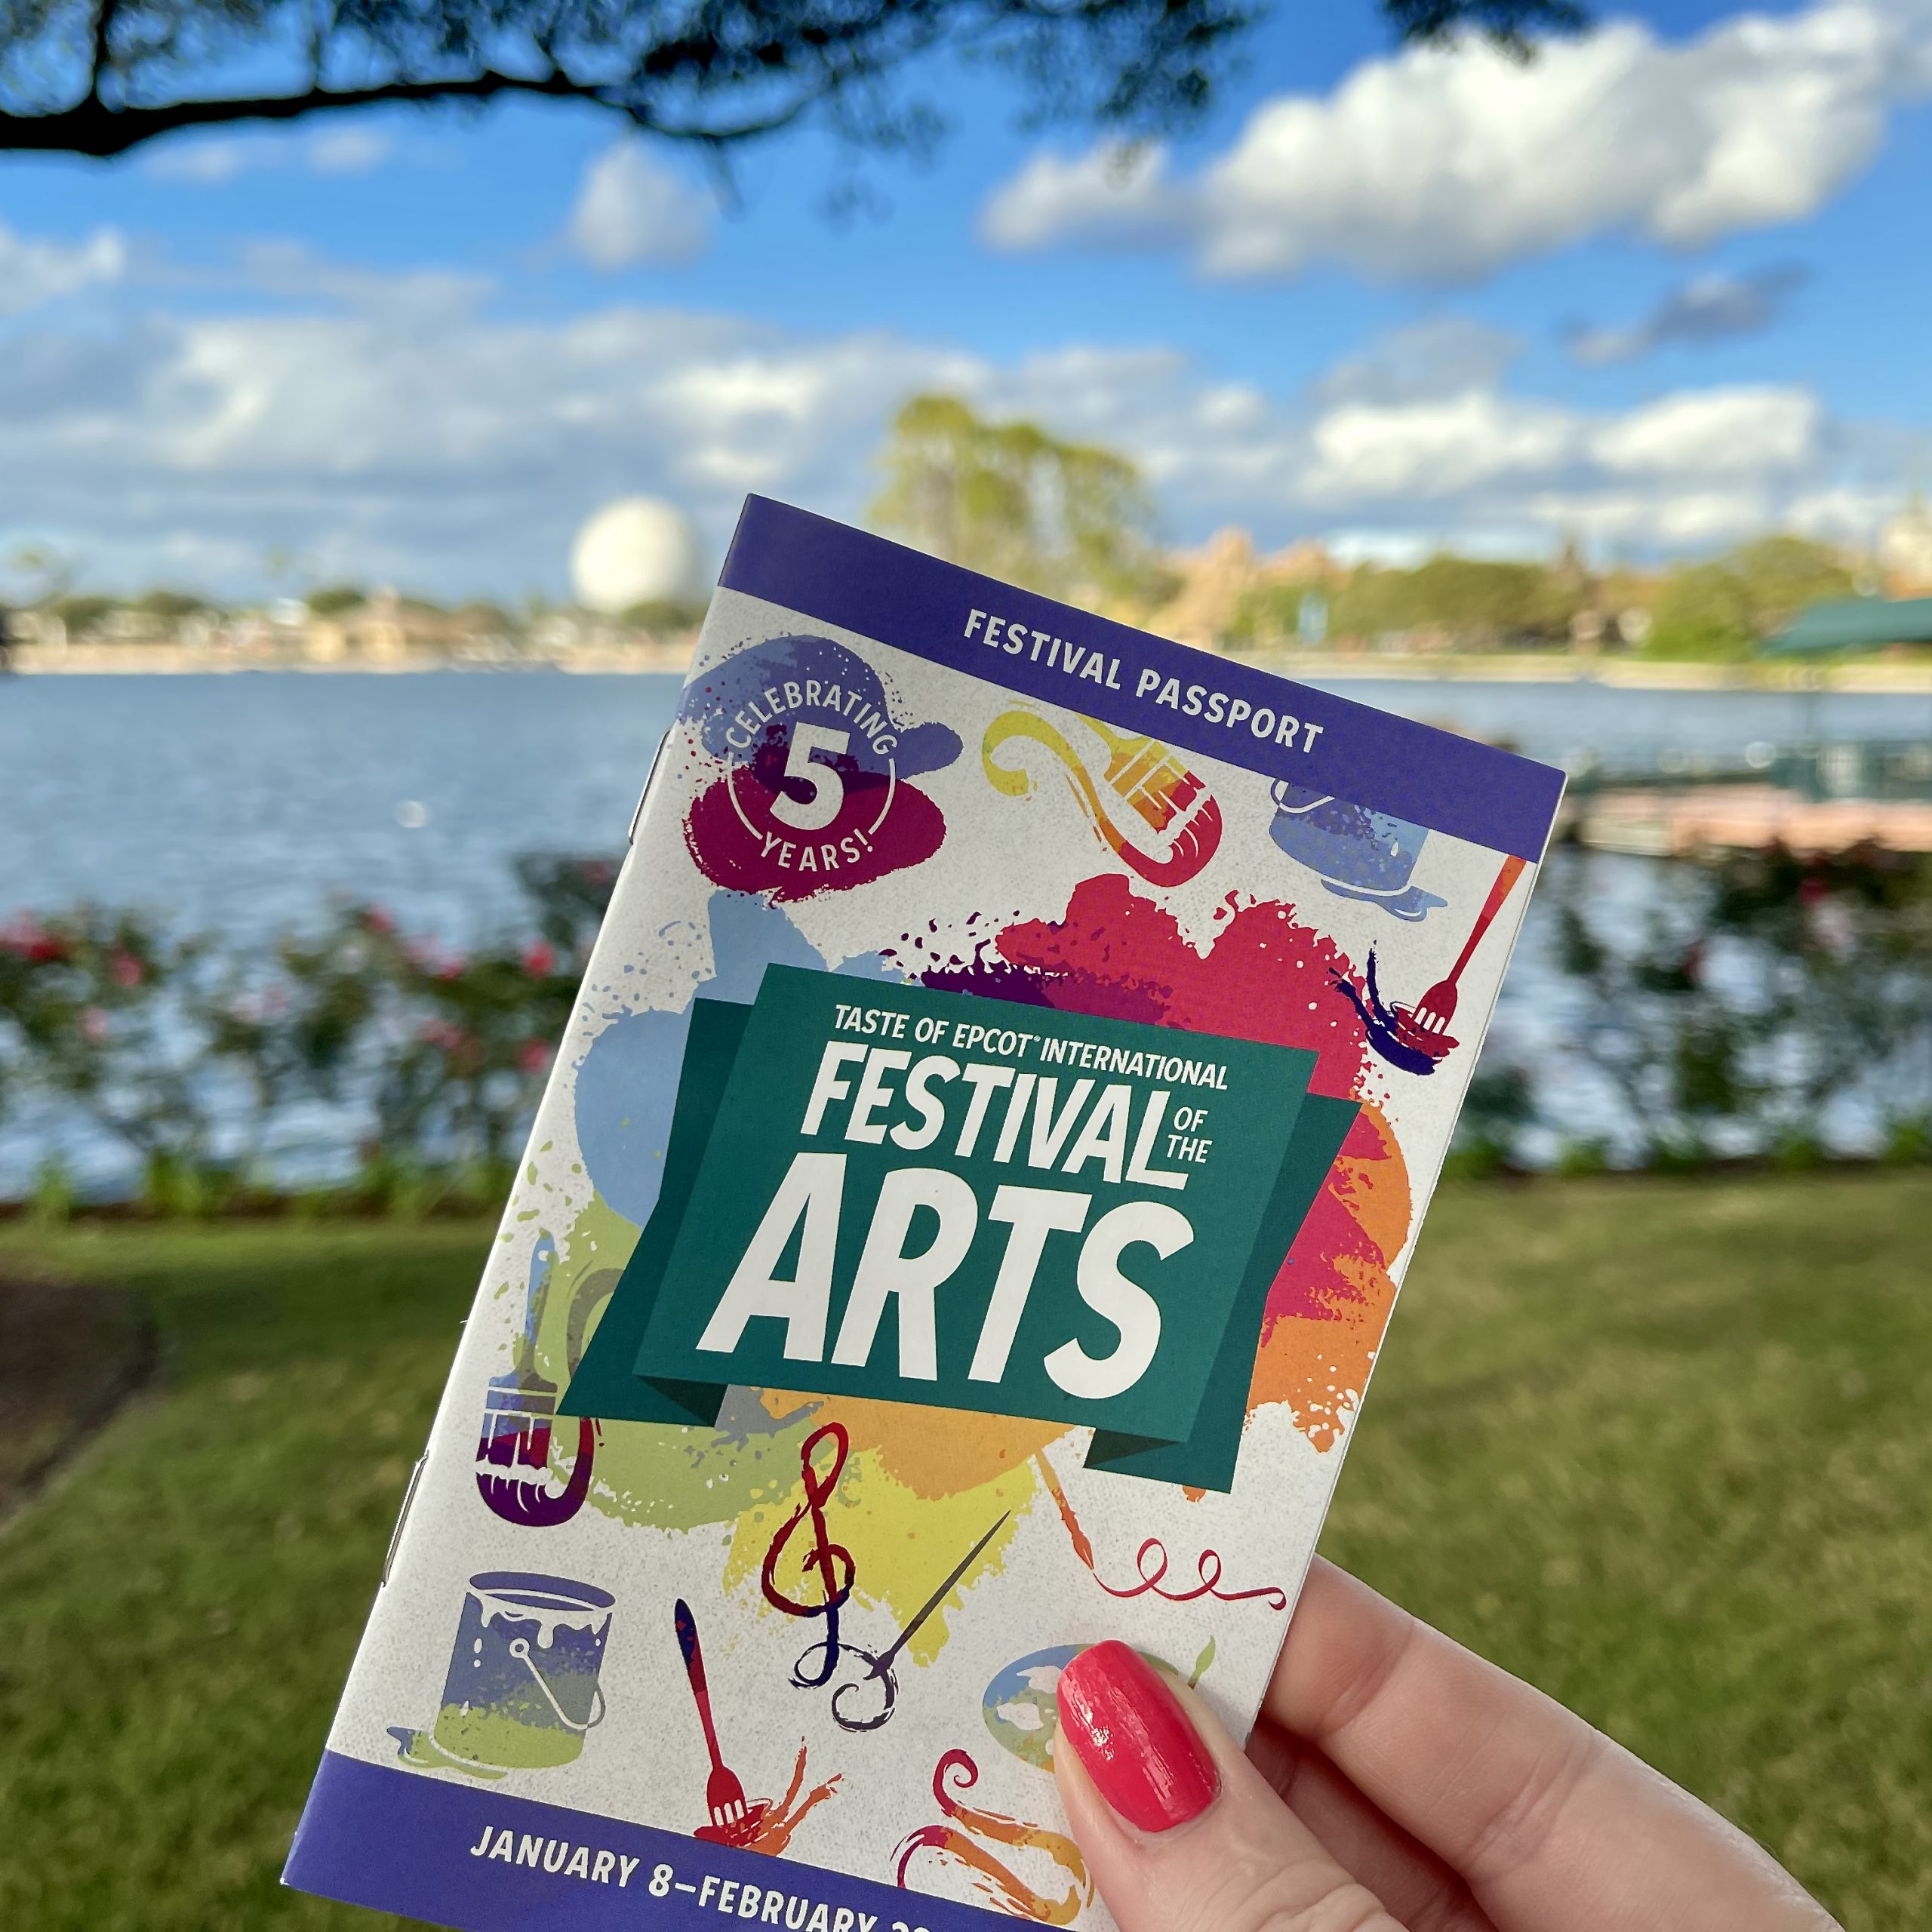 International Children's Festival of the Arts - If you are looking